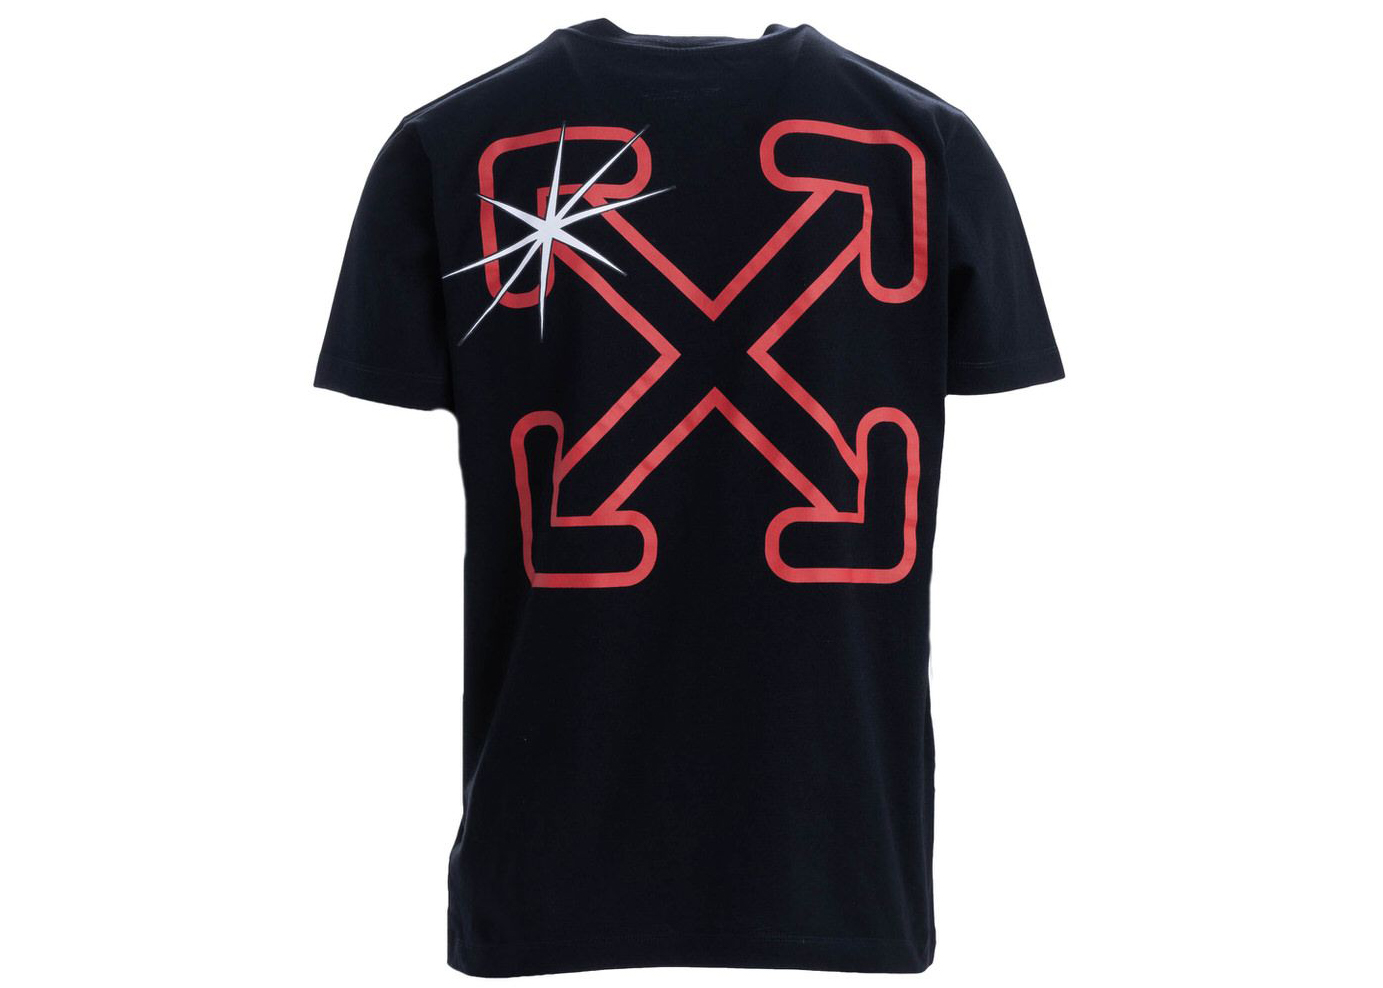 OFF-WHITE Starred Arrow T-Shirt Black Red Men's - SS20 - US